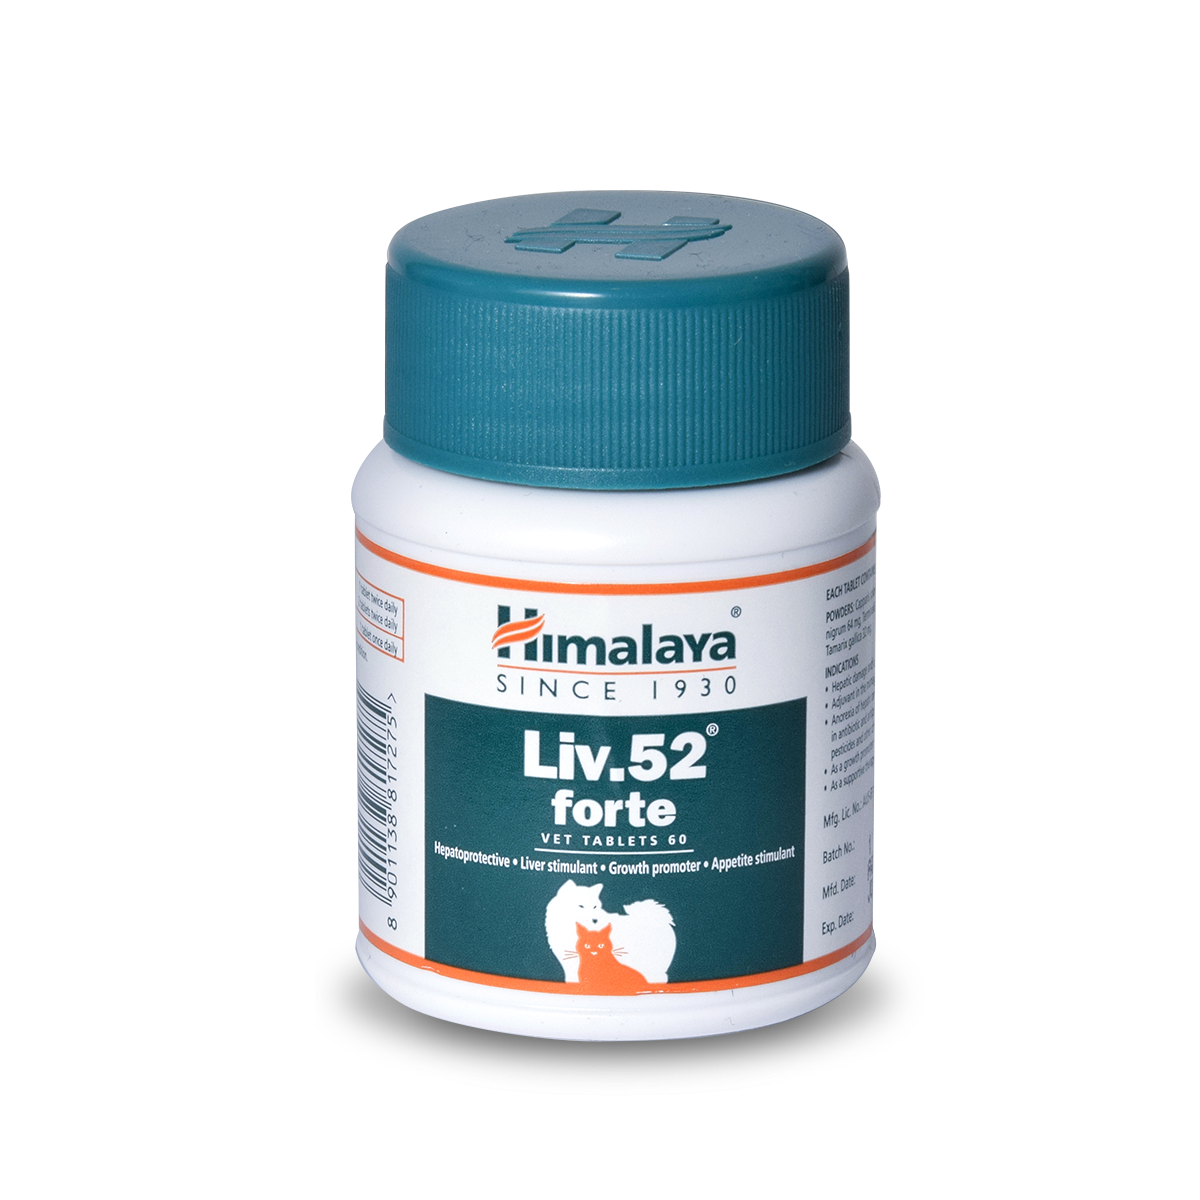 Buy Himalaya Liv 52 Forte at a low price in online India on petindiaonline